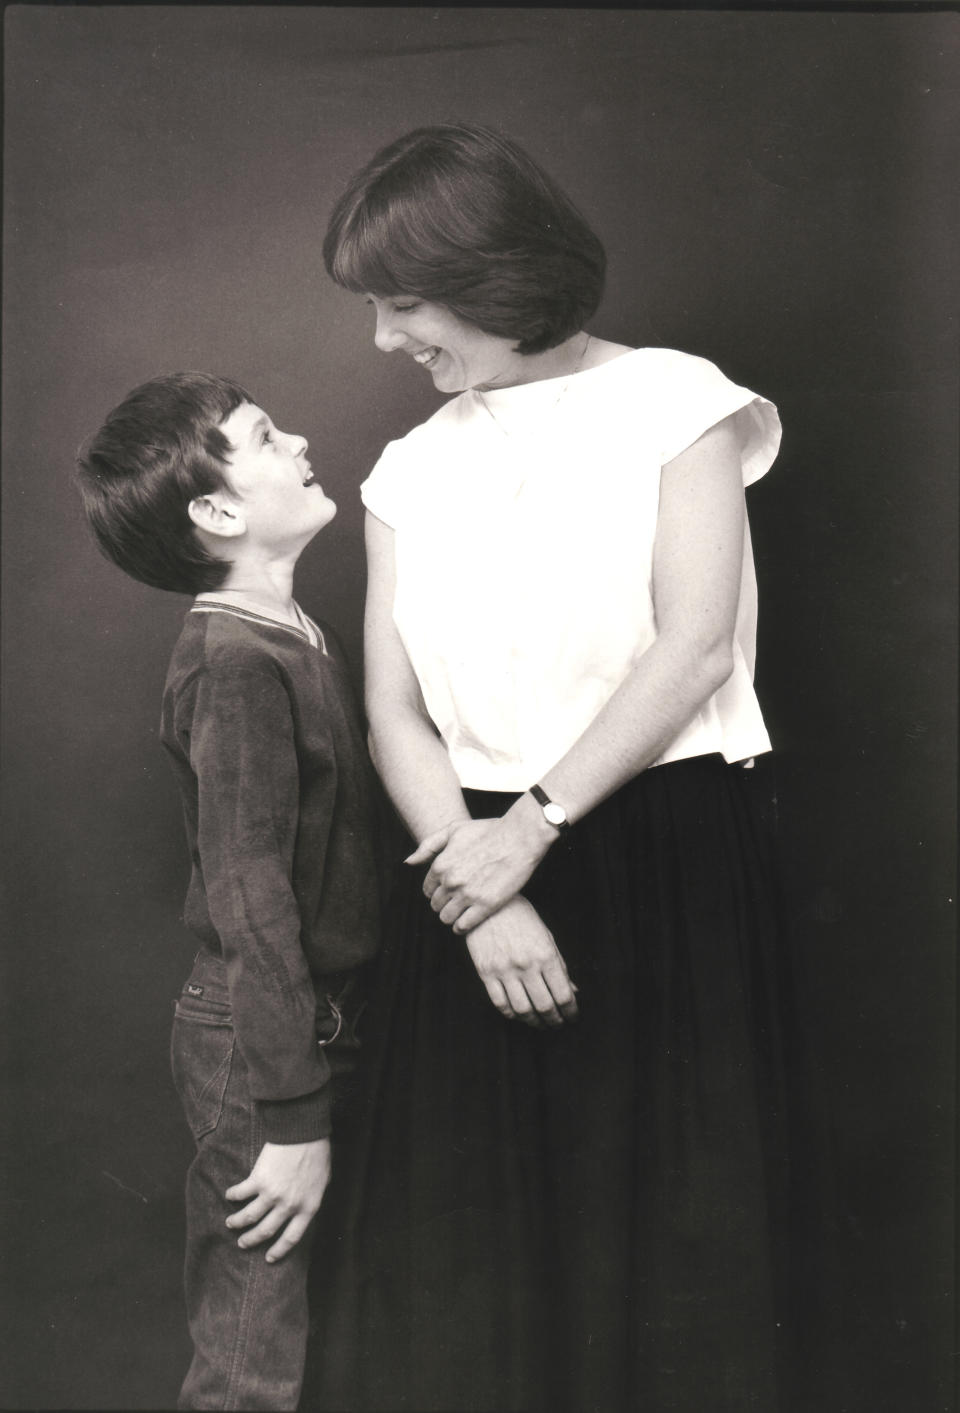 Henry Thomas and mother. File photo promoting the motion picture "E.T." in  1982. (Photo by Mark Weiss/WireImage)